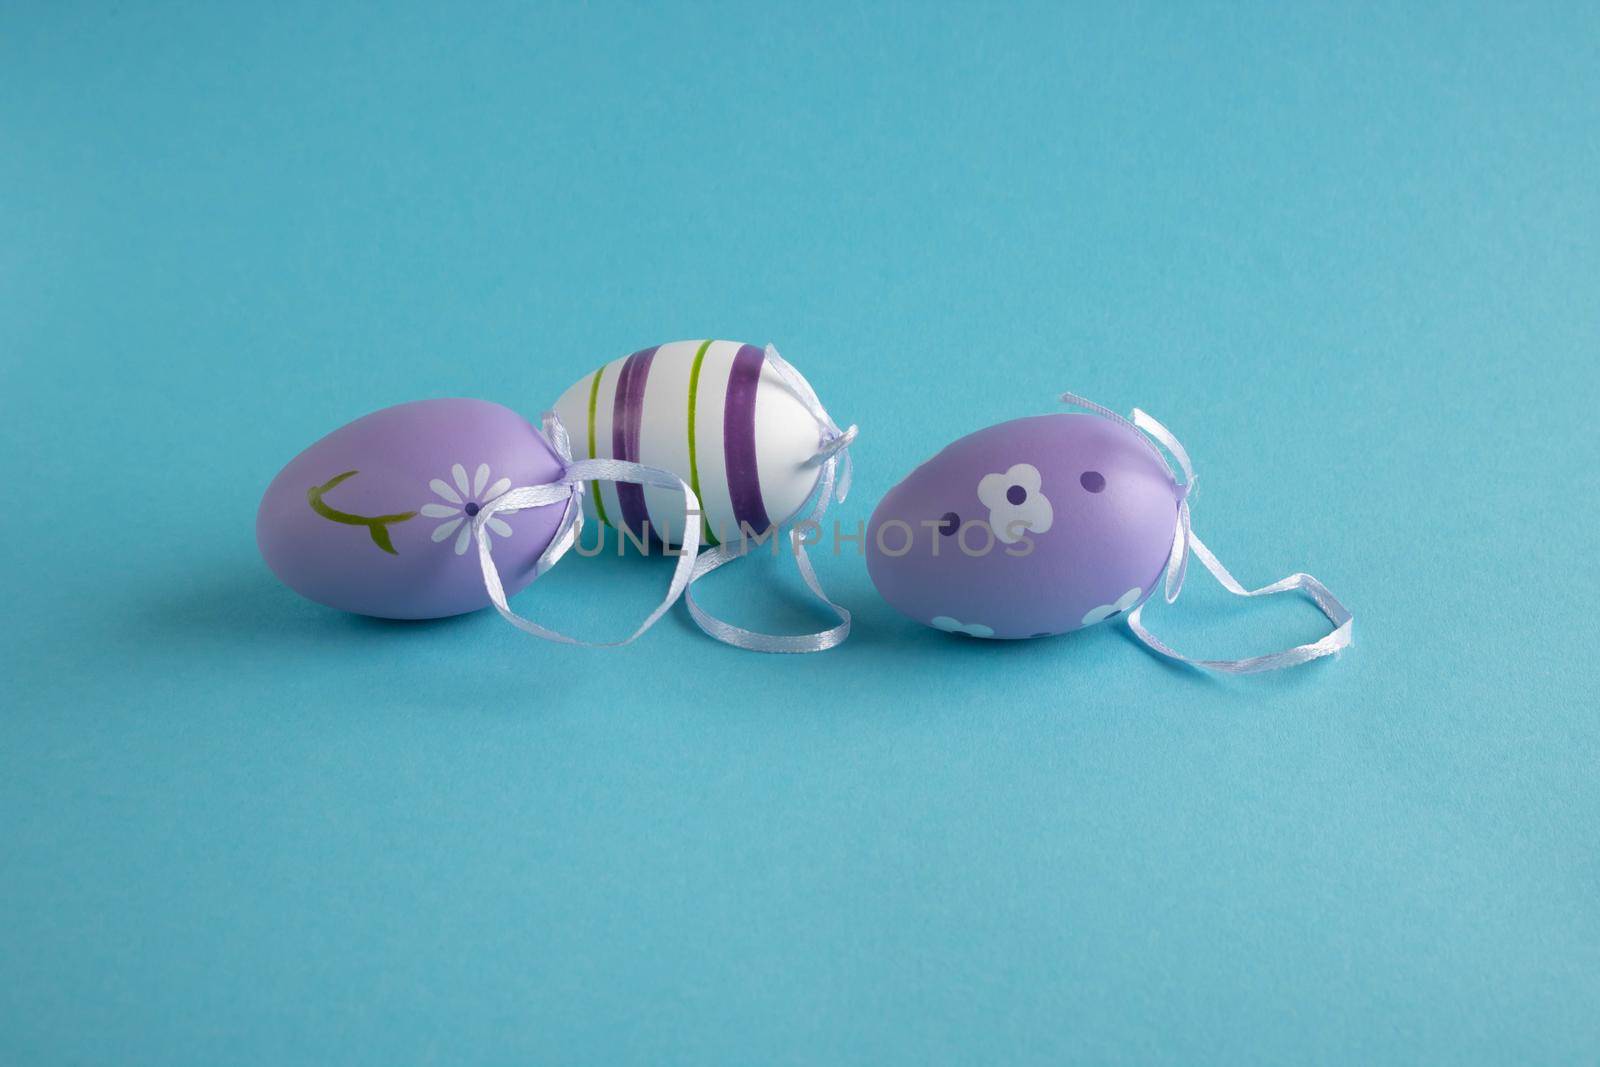 Three painted eggs lie on a blue background. lilac easter eggs easter concept.